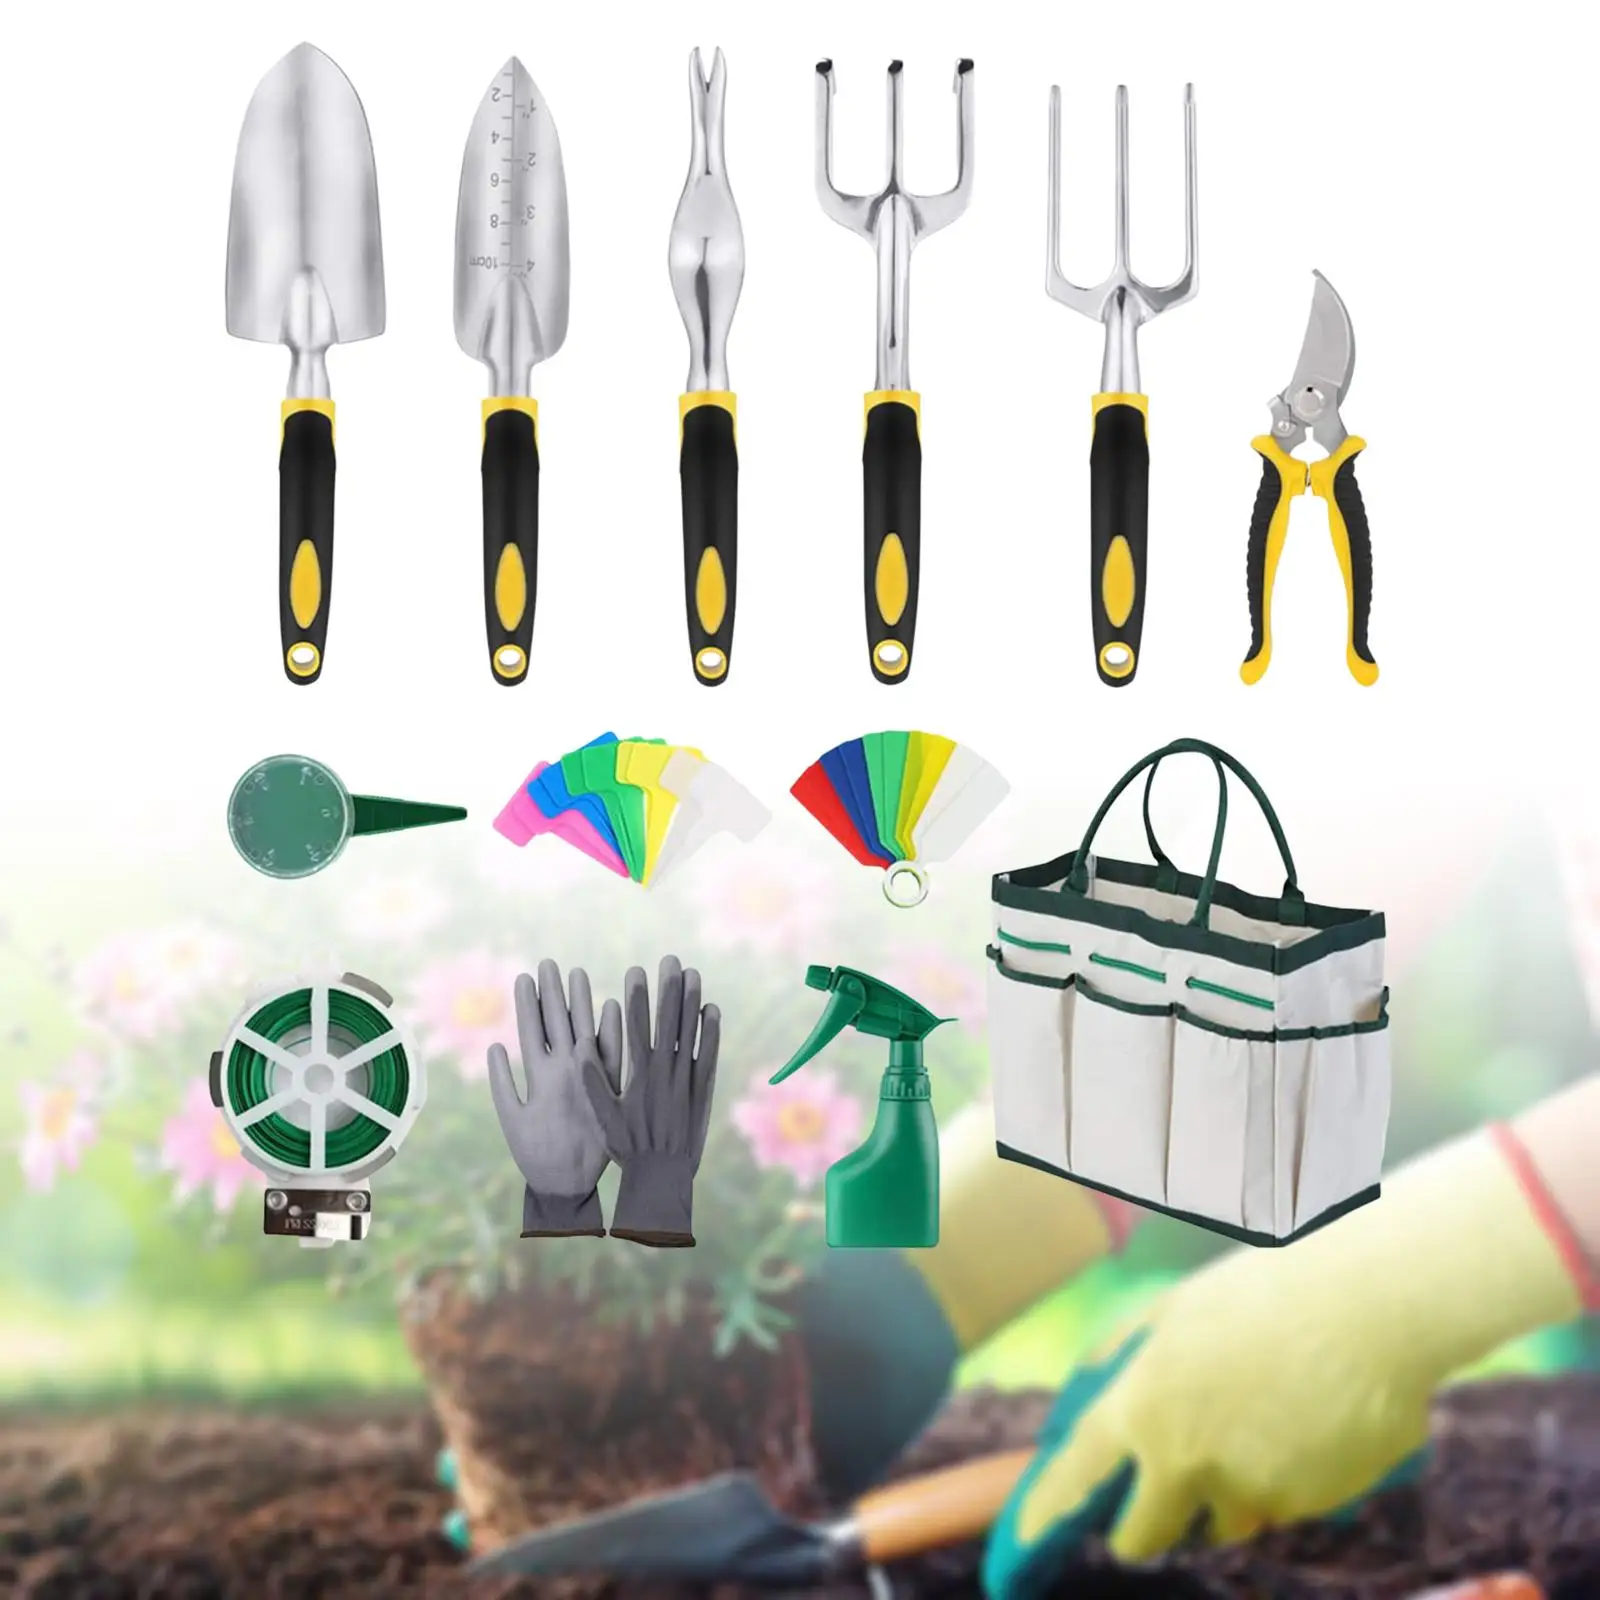 13 Pieces Portable Hand Shovels Balcony Potted Cultivation Hand Tool Hand Tool Garden Shovels for garden Transplanting